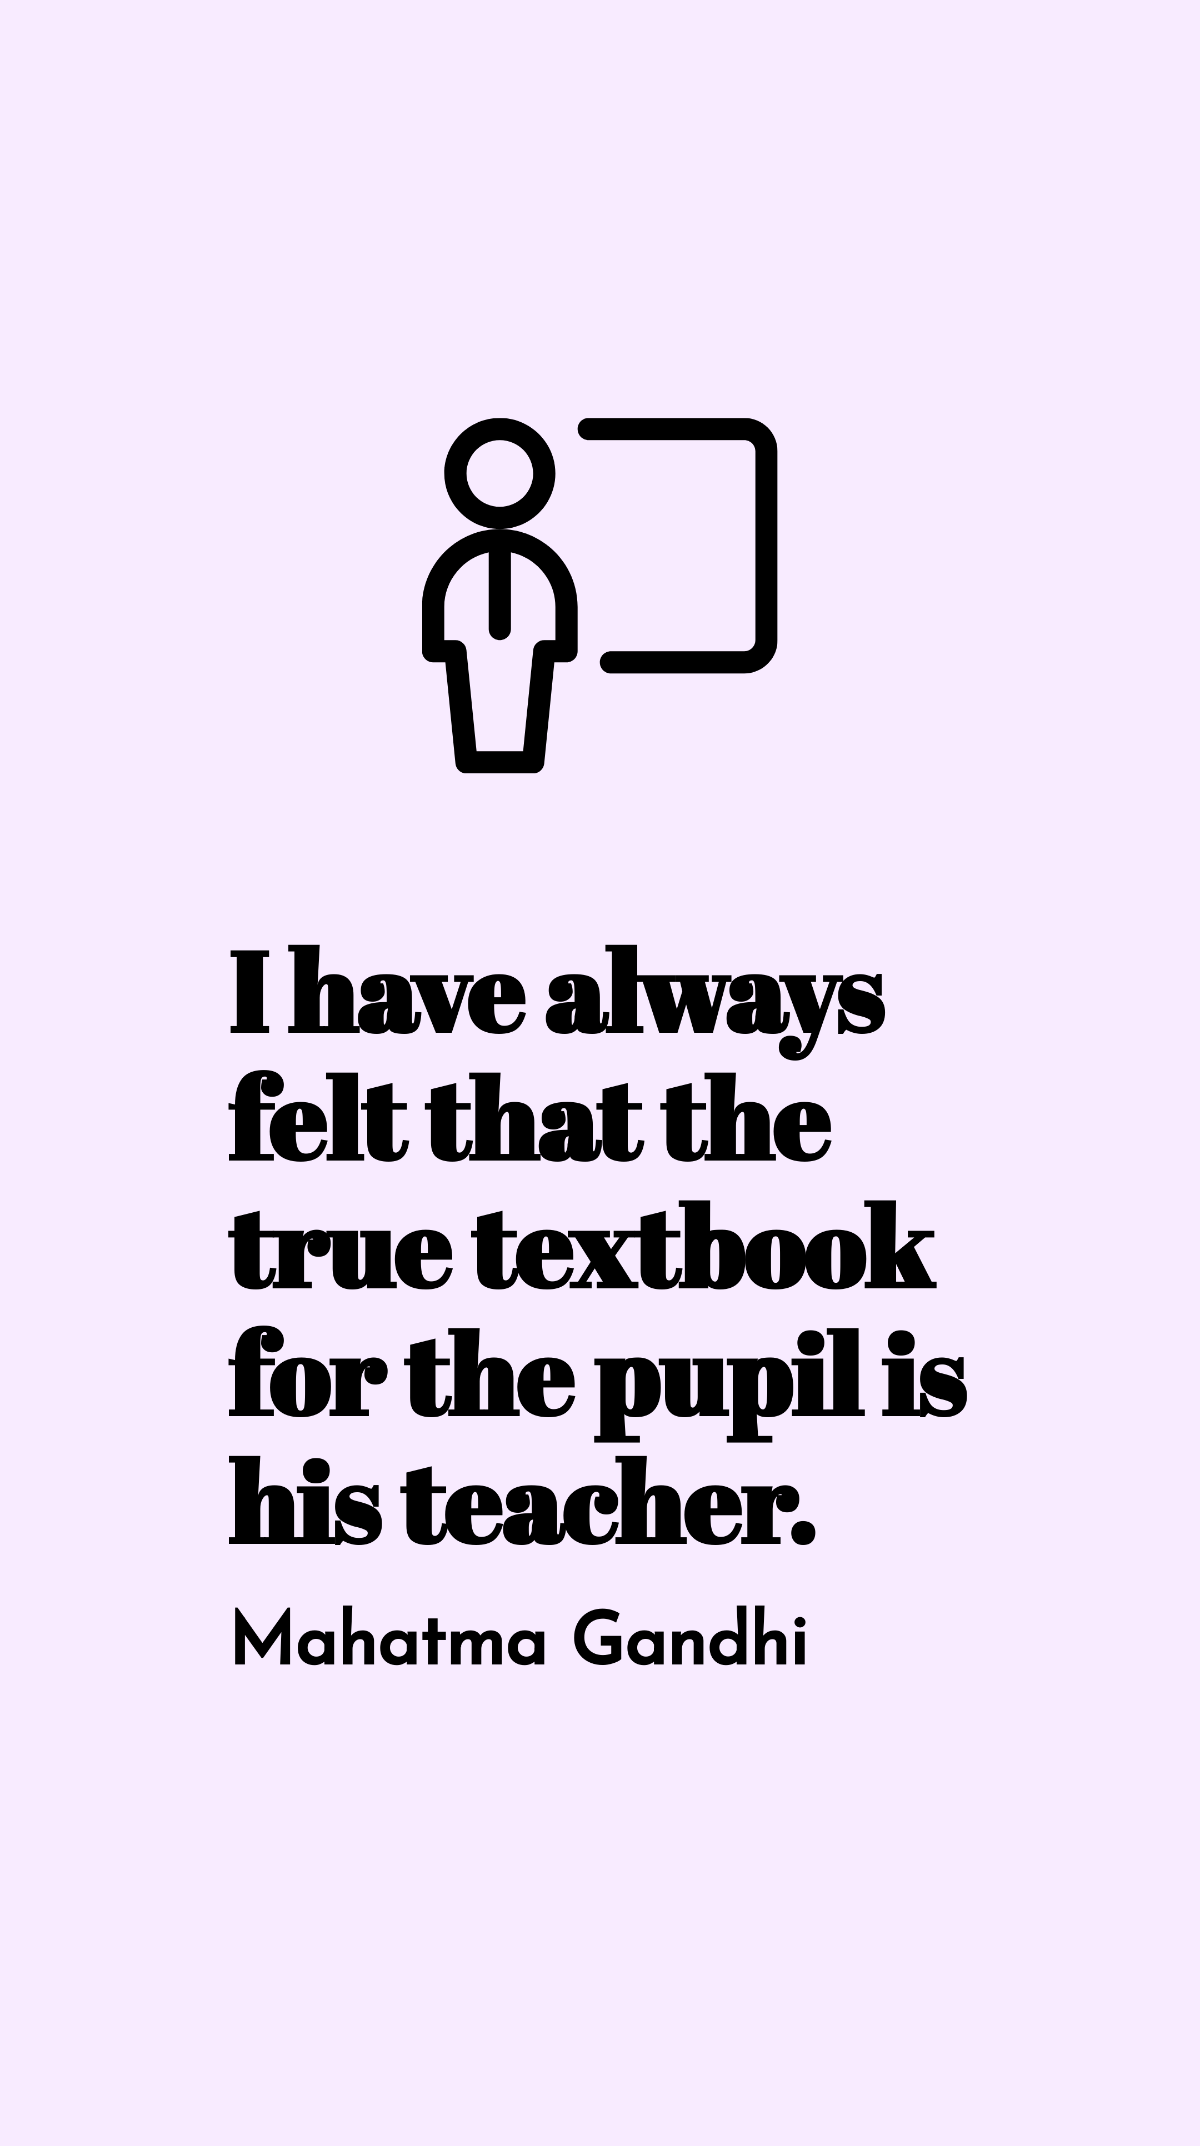 Mahatma Gandhi - I have always felt that the true textbook for the pupil is his teacher.